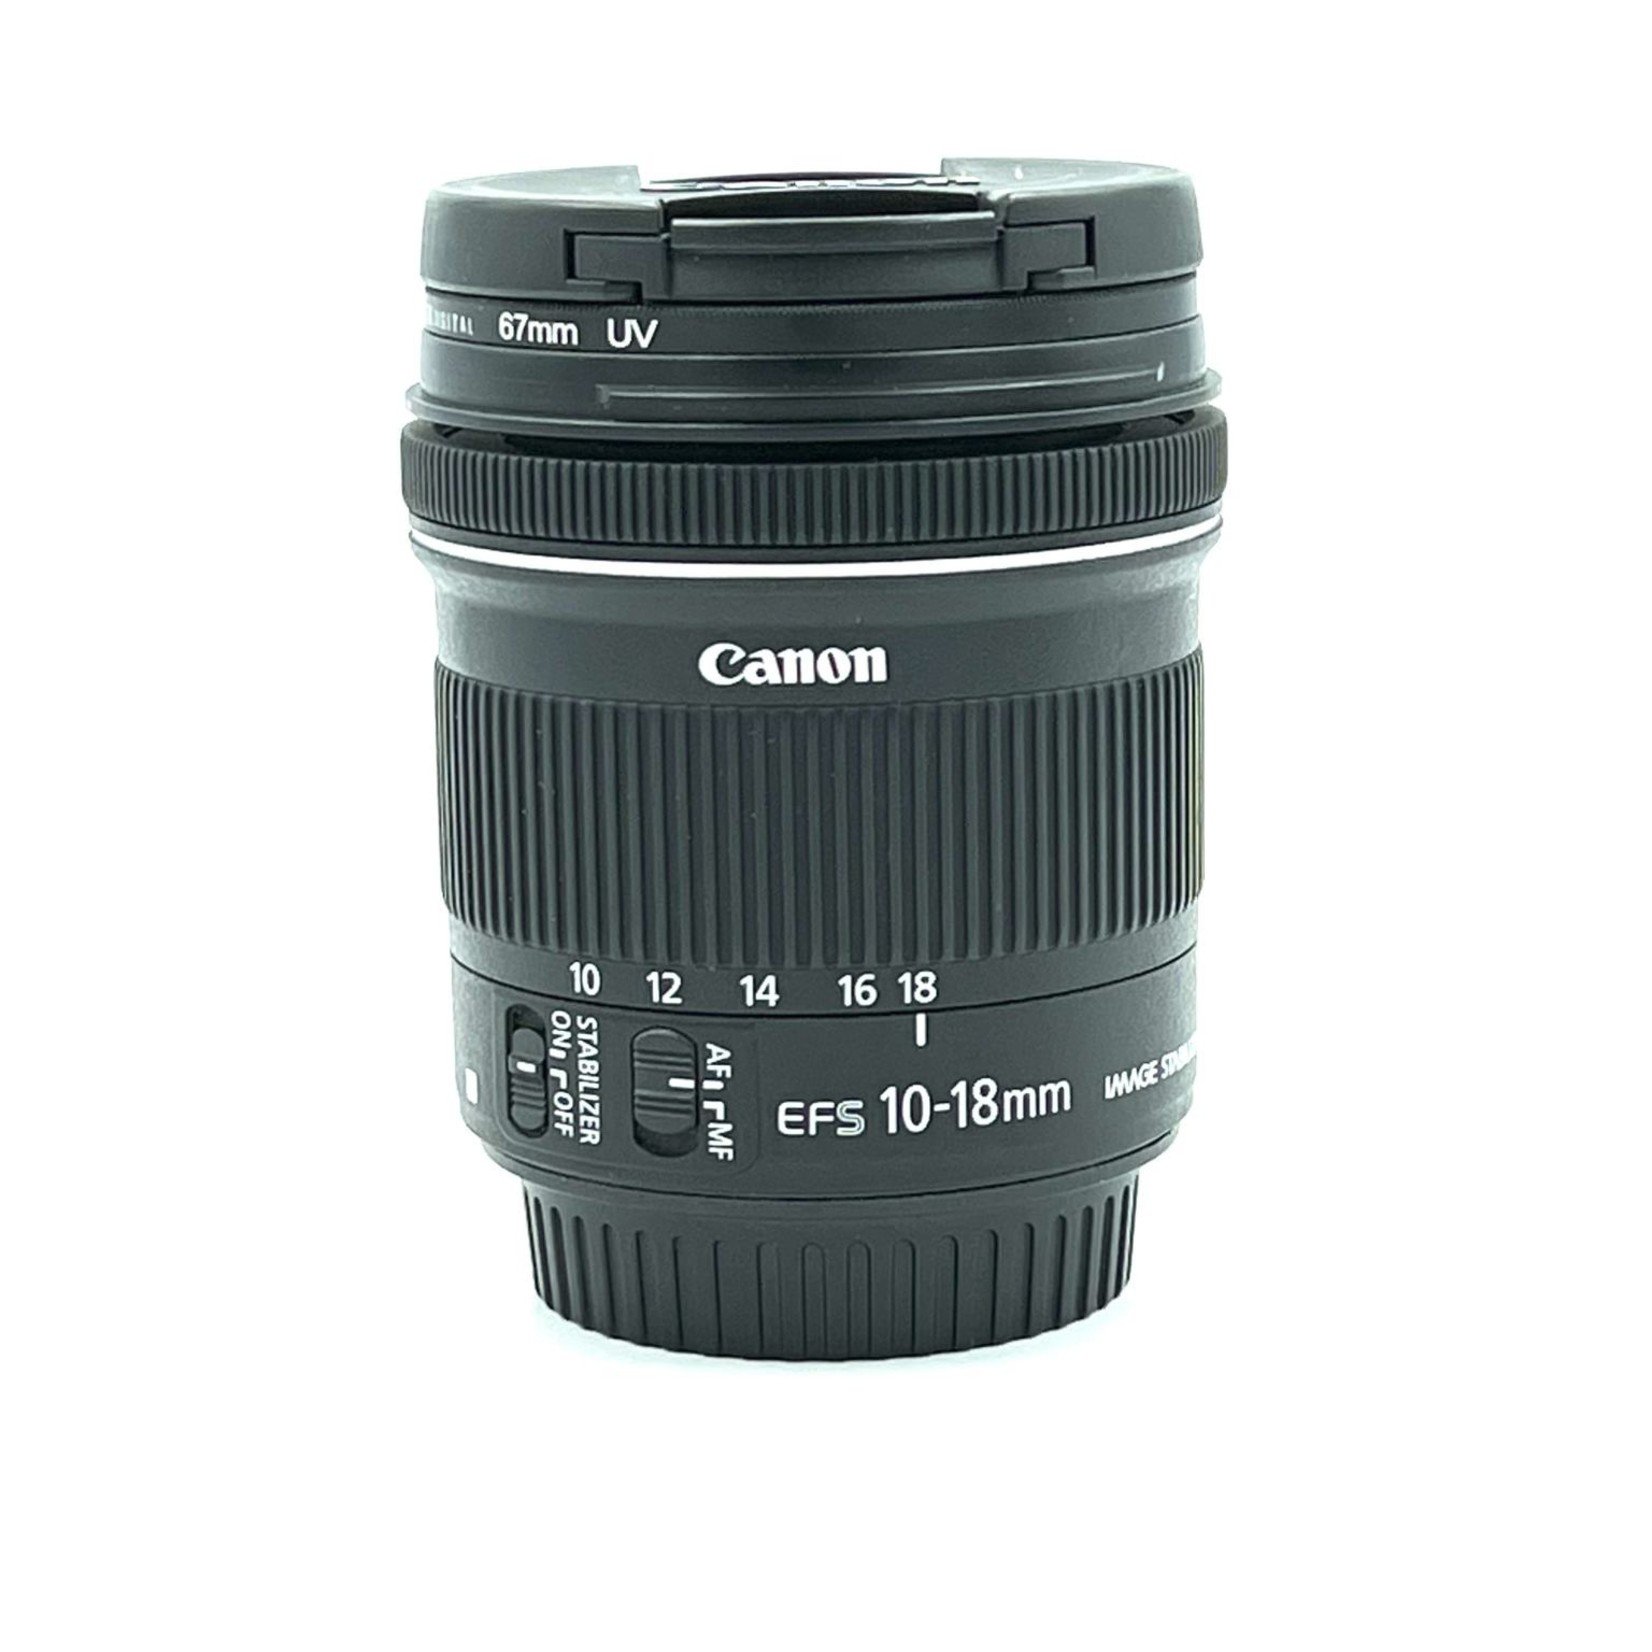 Canon Used Canon EFS 10-18mm F4.5-5.6